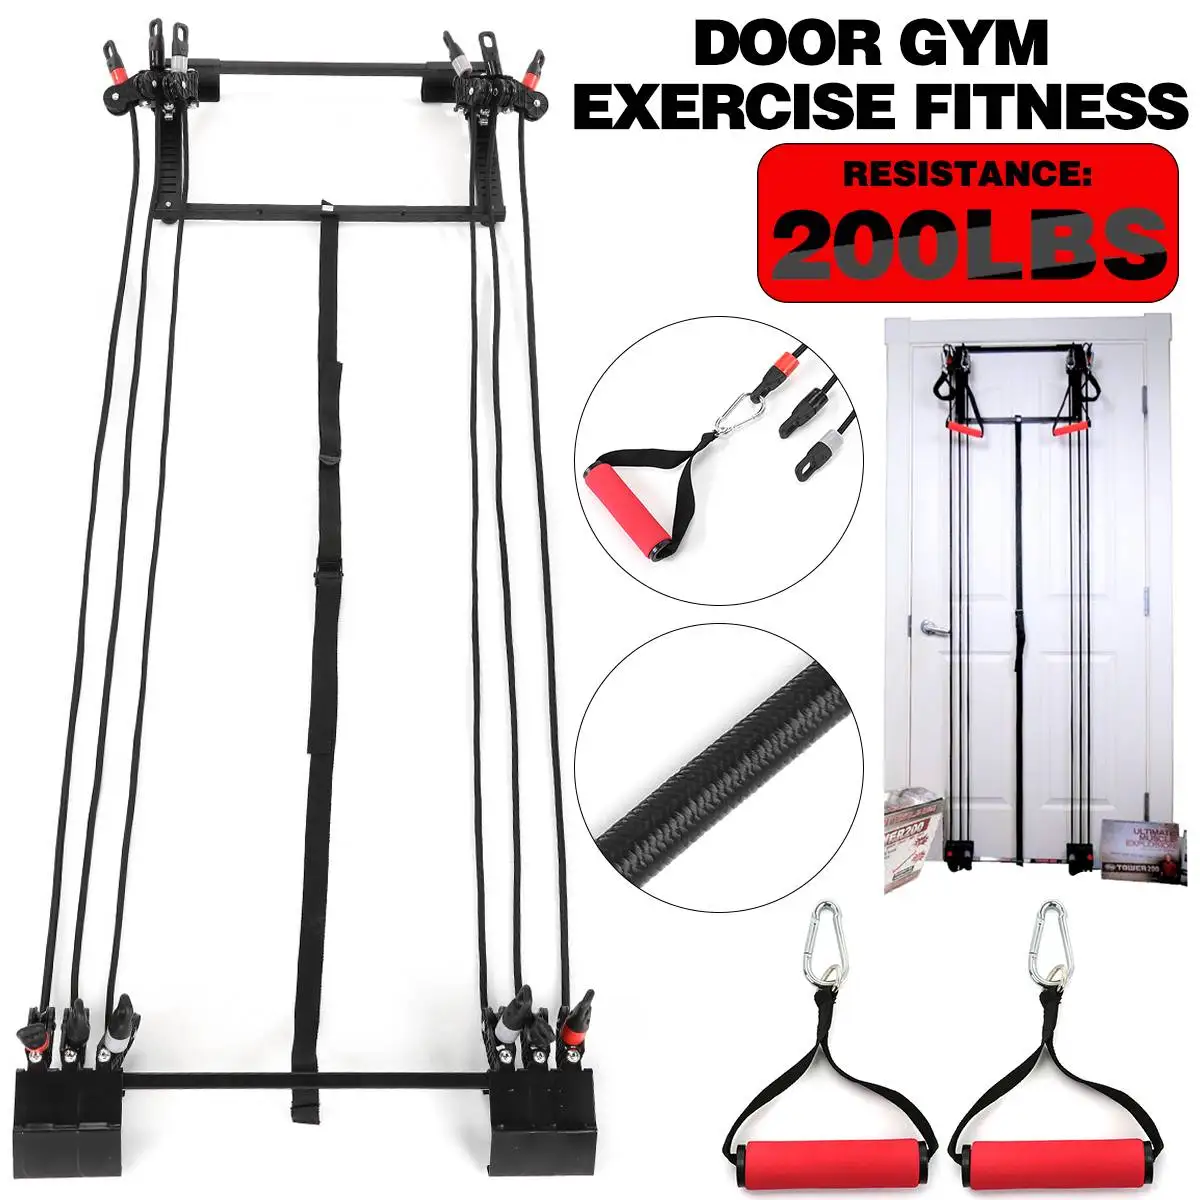 200LB Tower Strength Training Door Gym Full Body Workout Fitness W/Straight Bar Arm Blaster US STOCK